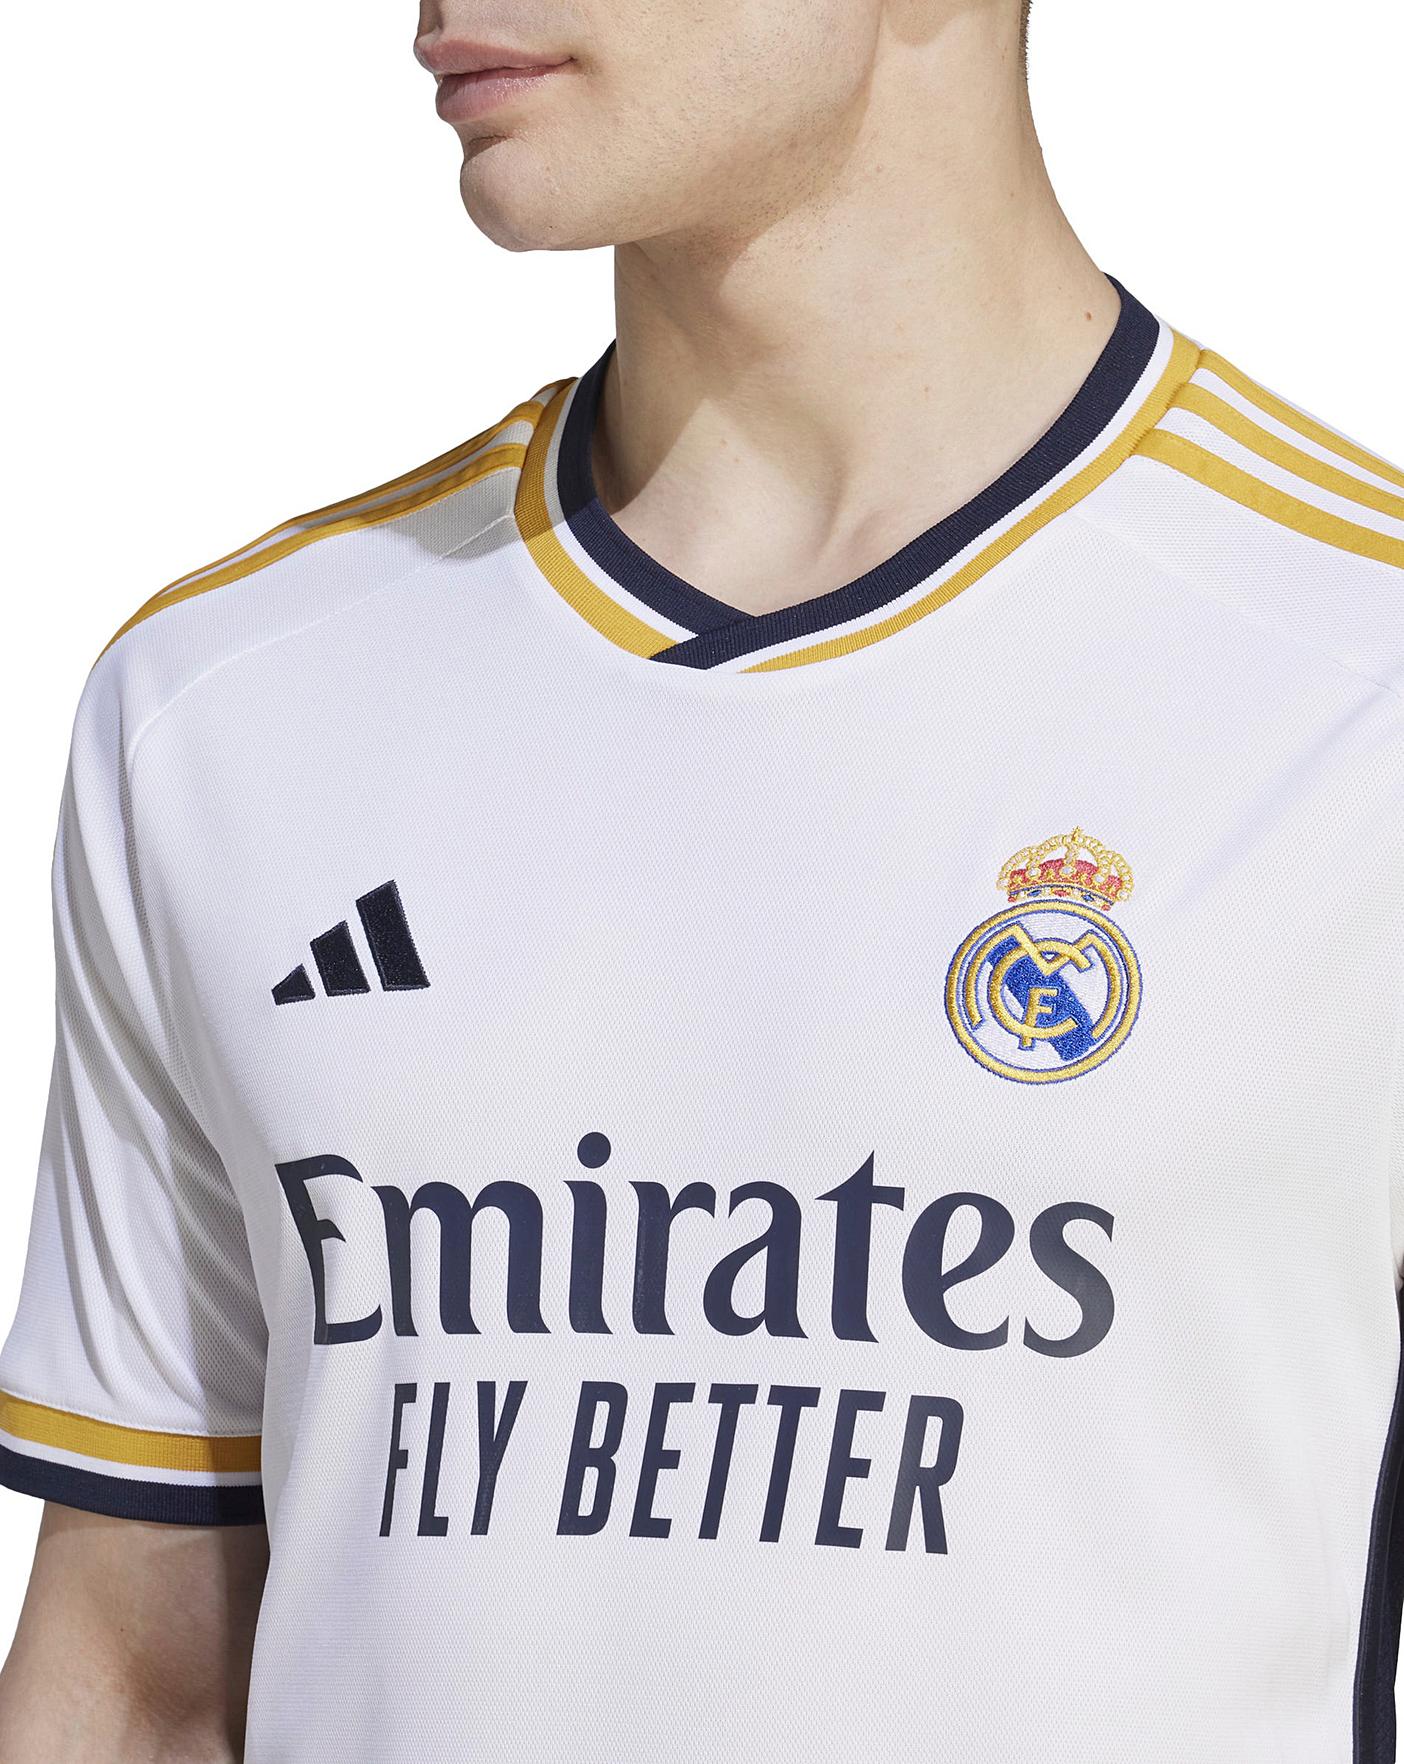  adidas Men's Real Madrid 23/24 Home Jersey - A Sleek and  Lightweight Jersey with Gold Accents and Legendary Soccer History : Sports  